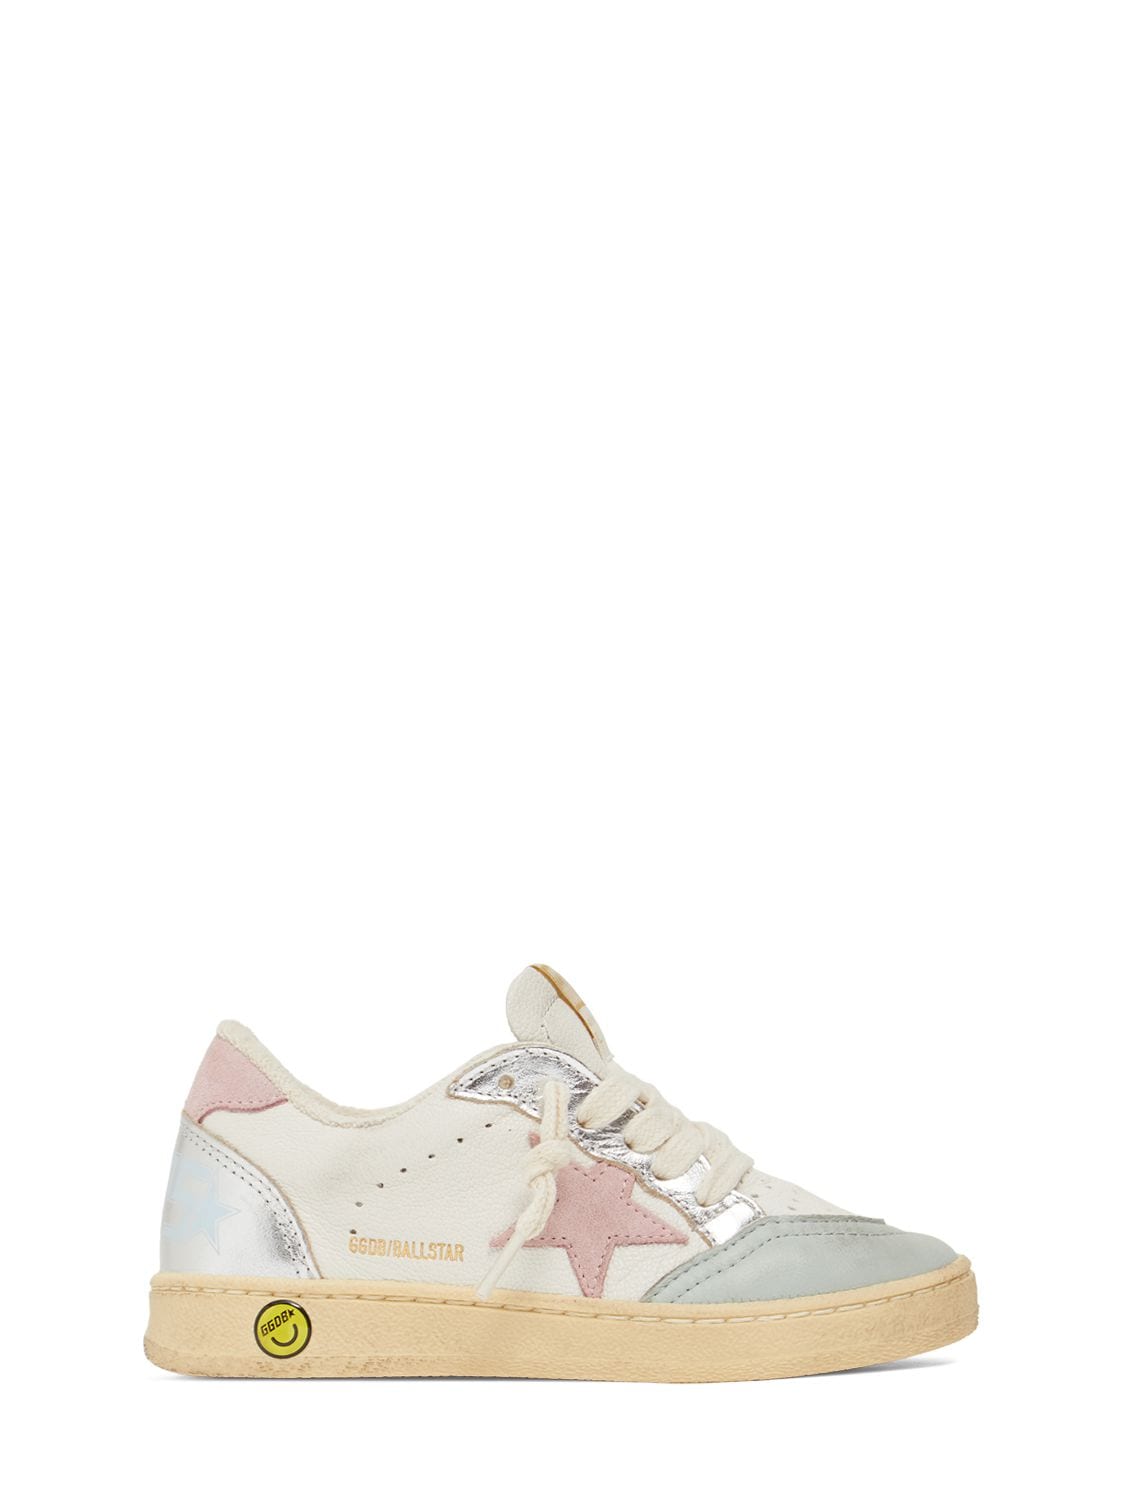 Golden Goose Kids' Ballstar Leather Lace-up Sneakers In White,pink